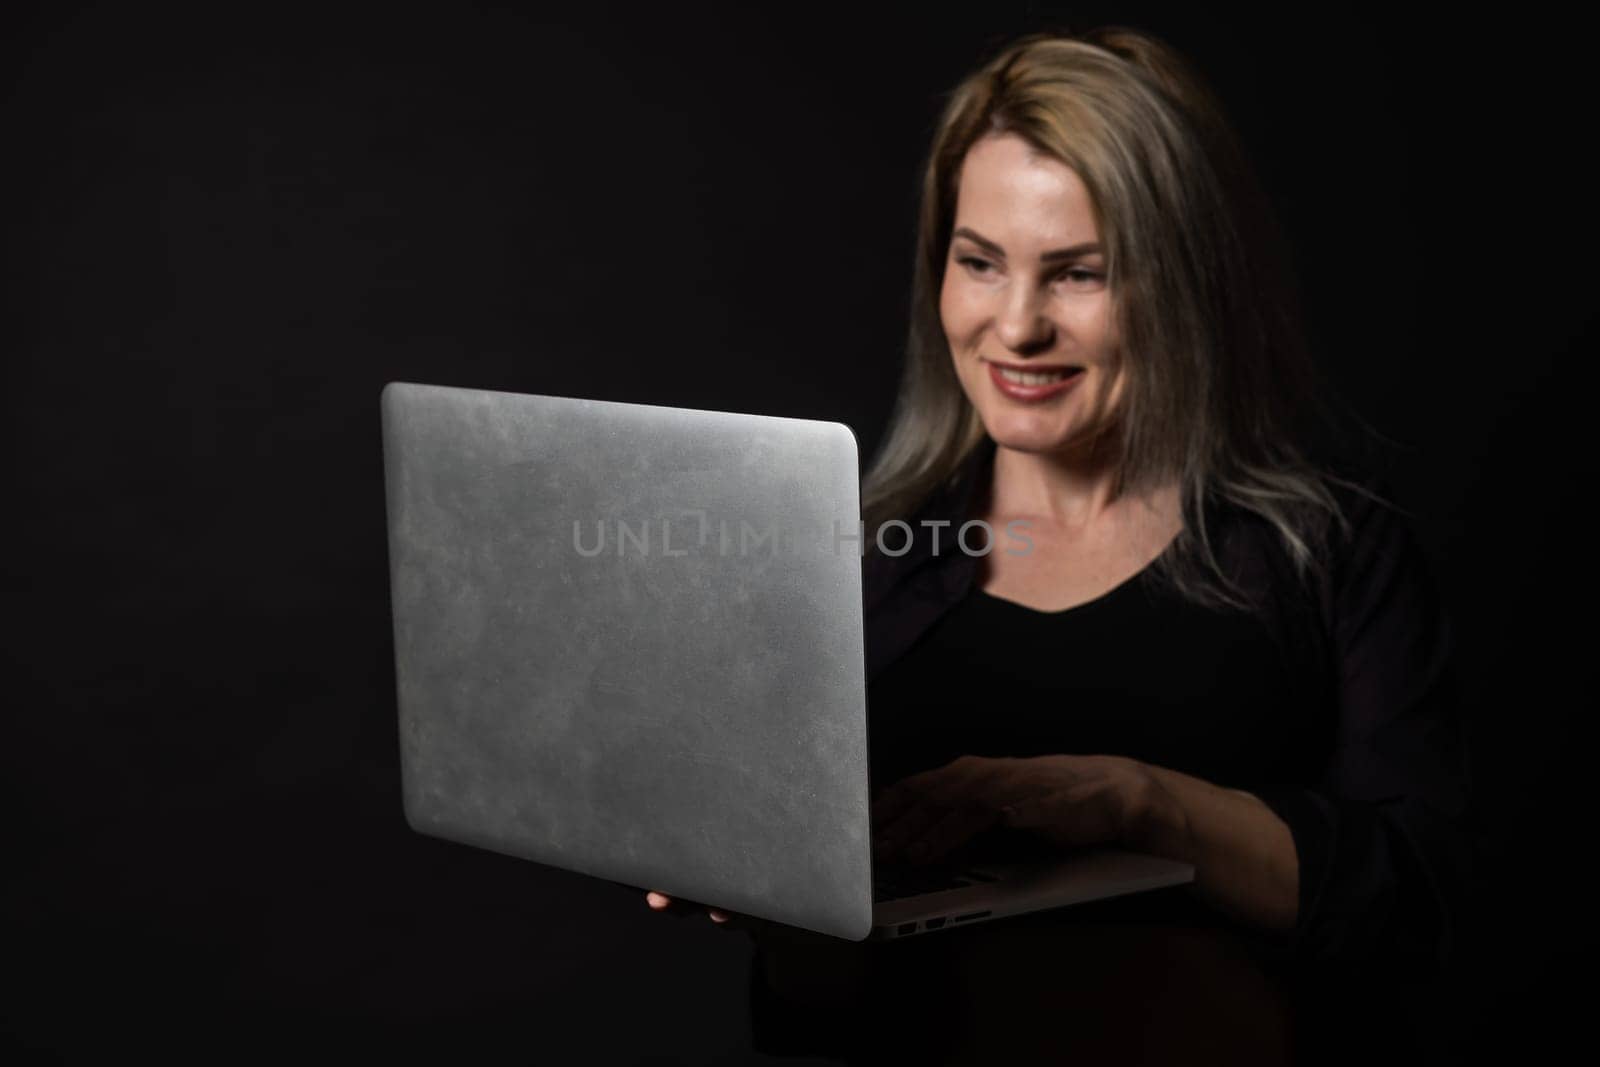 woman with laptop on black background.